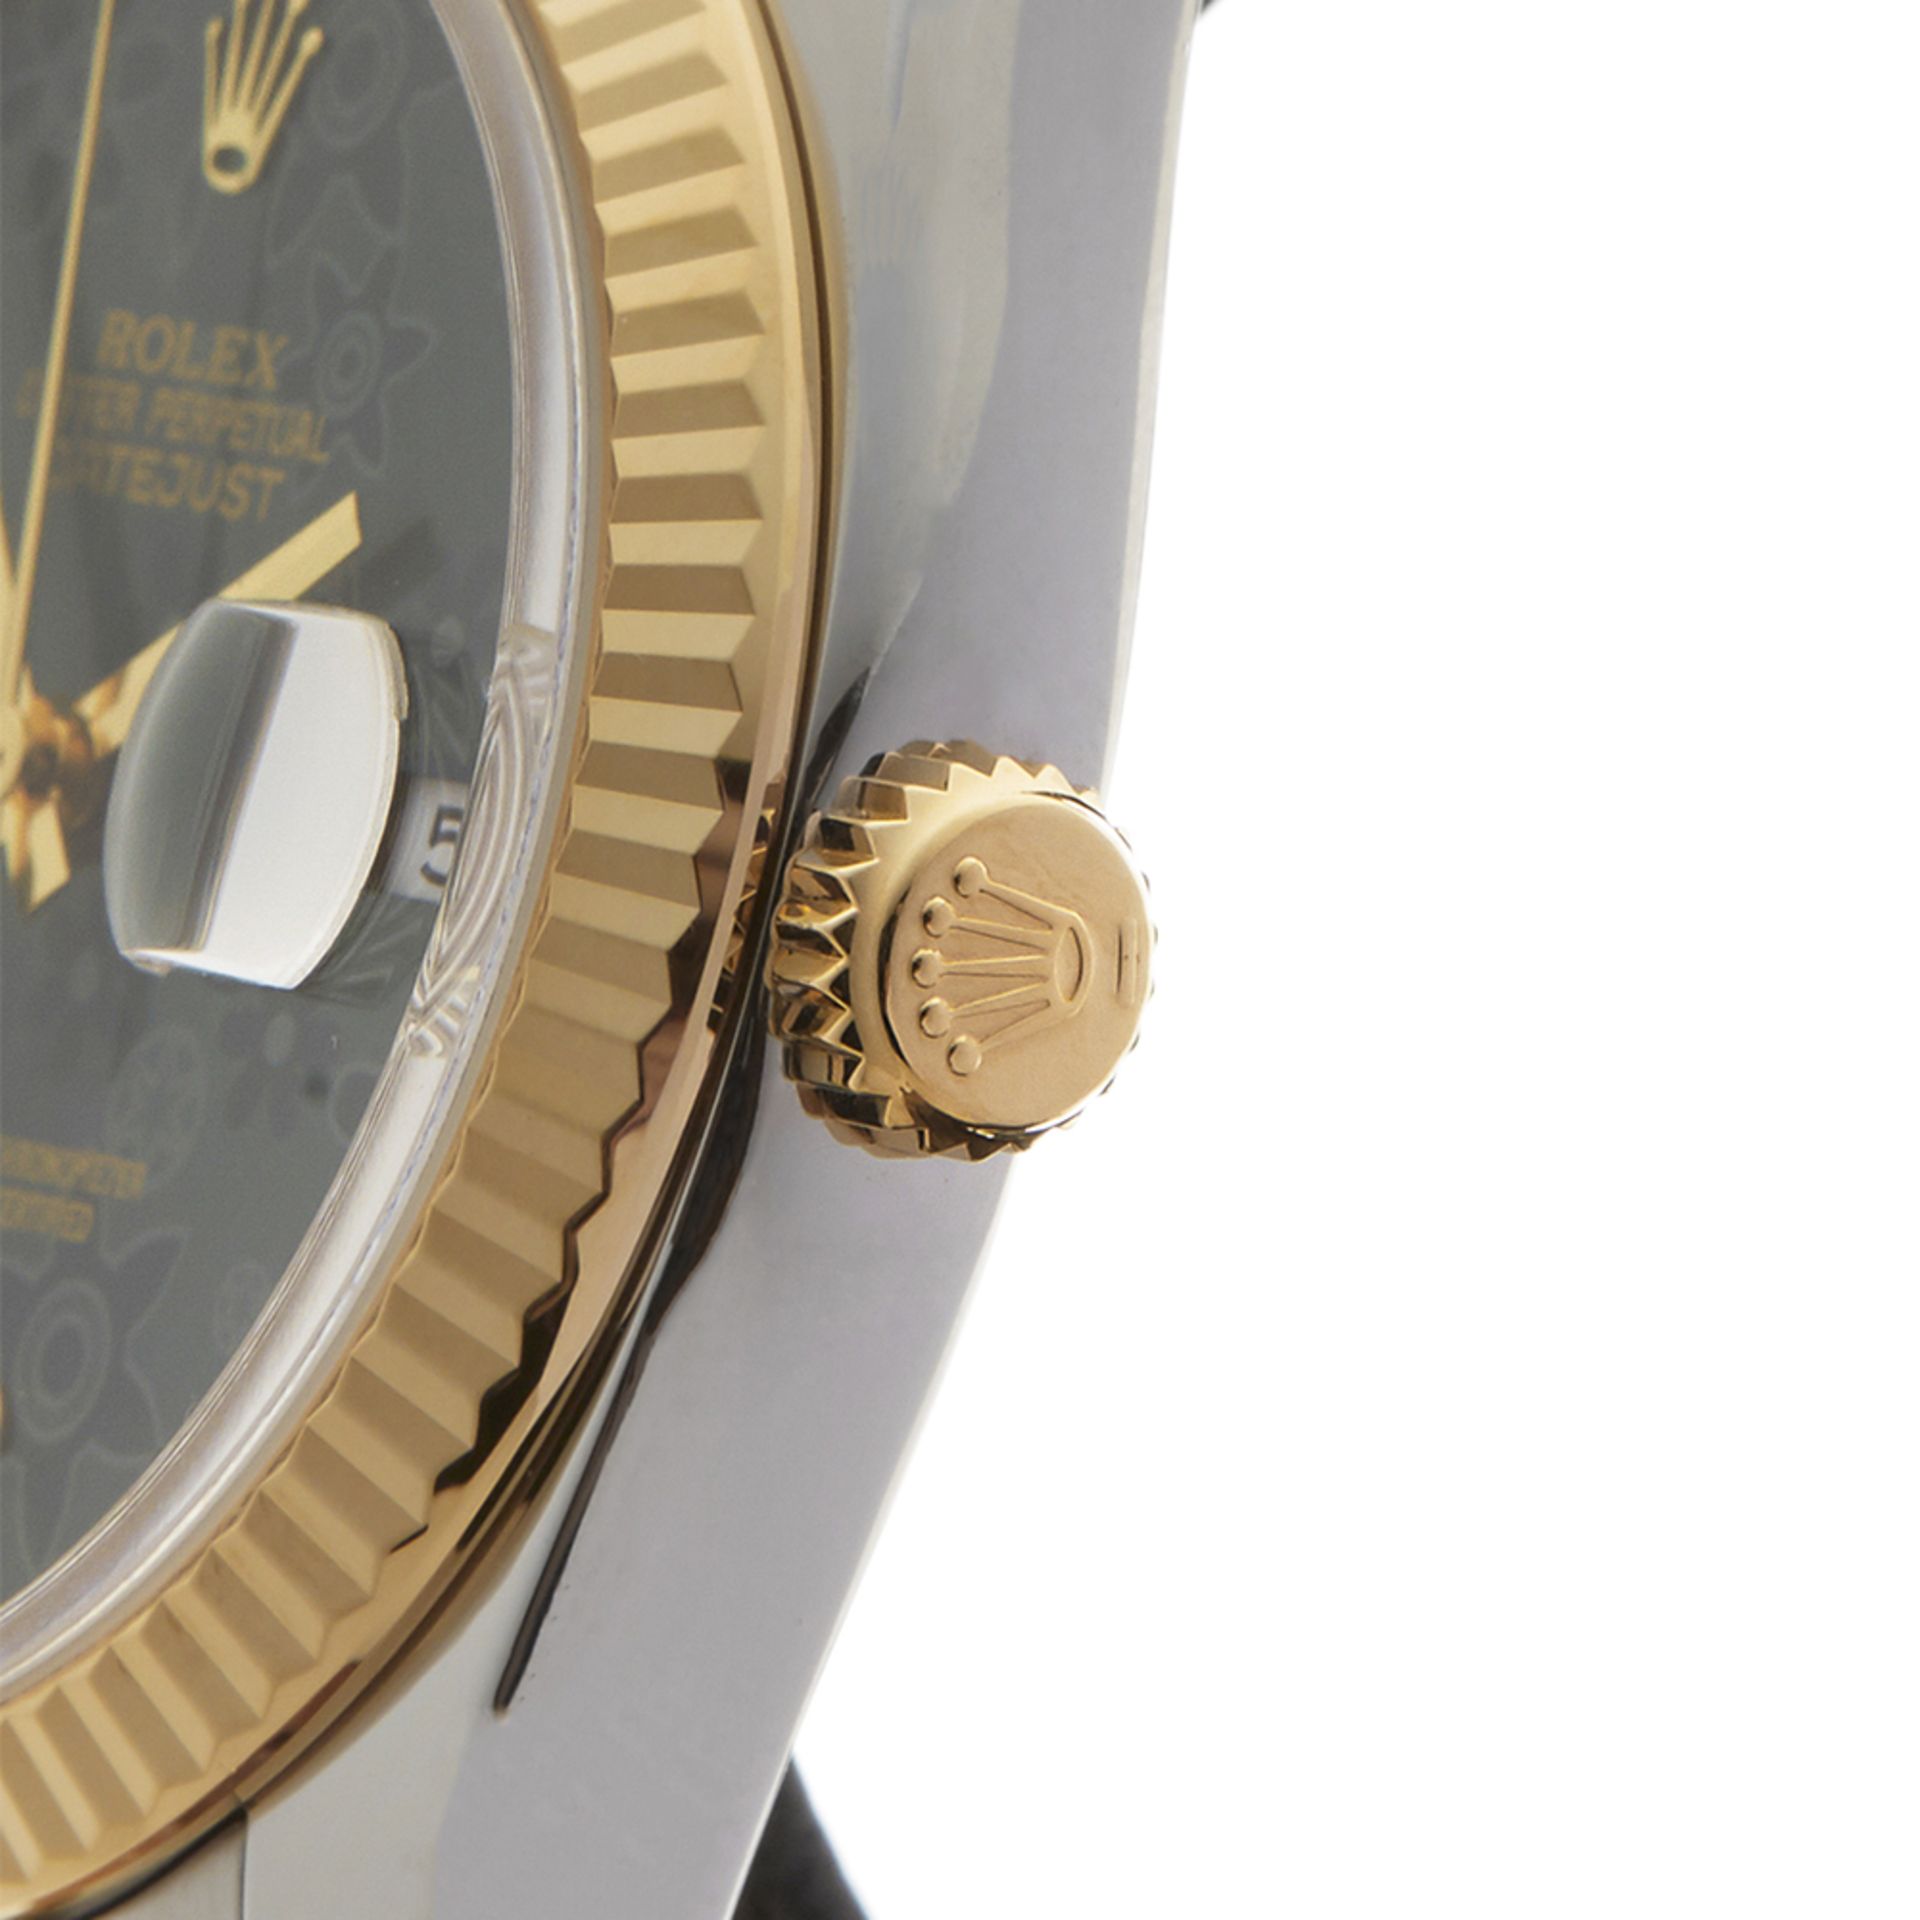 Rolex Datejust 36mm Stainless Steel & 18k Yellow Gold - 116233 - Image 4 of 9